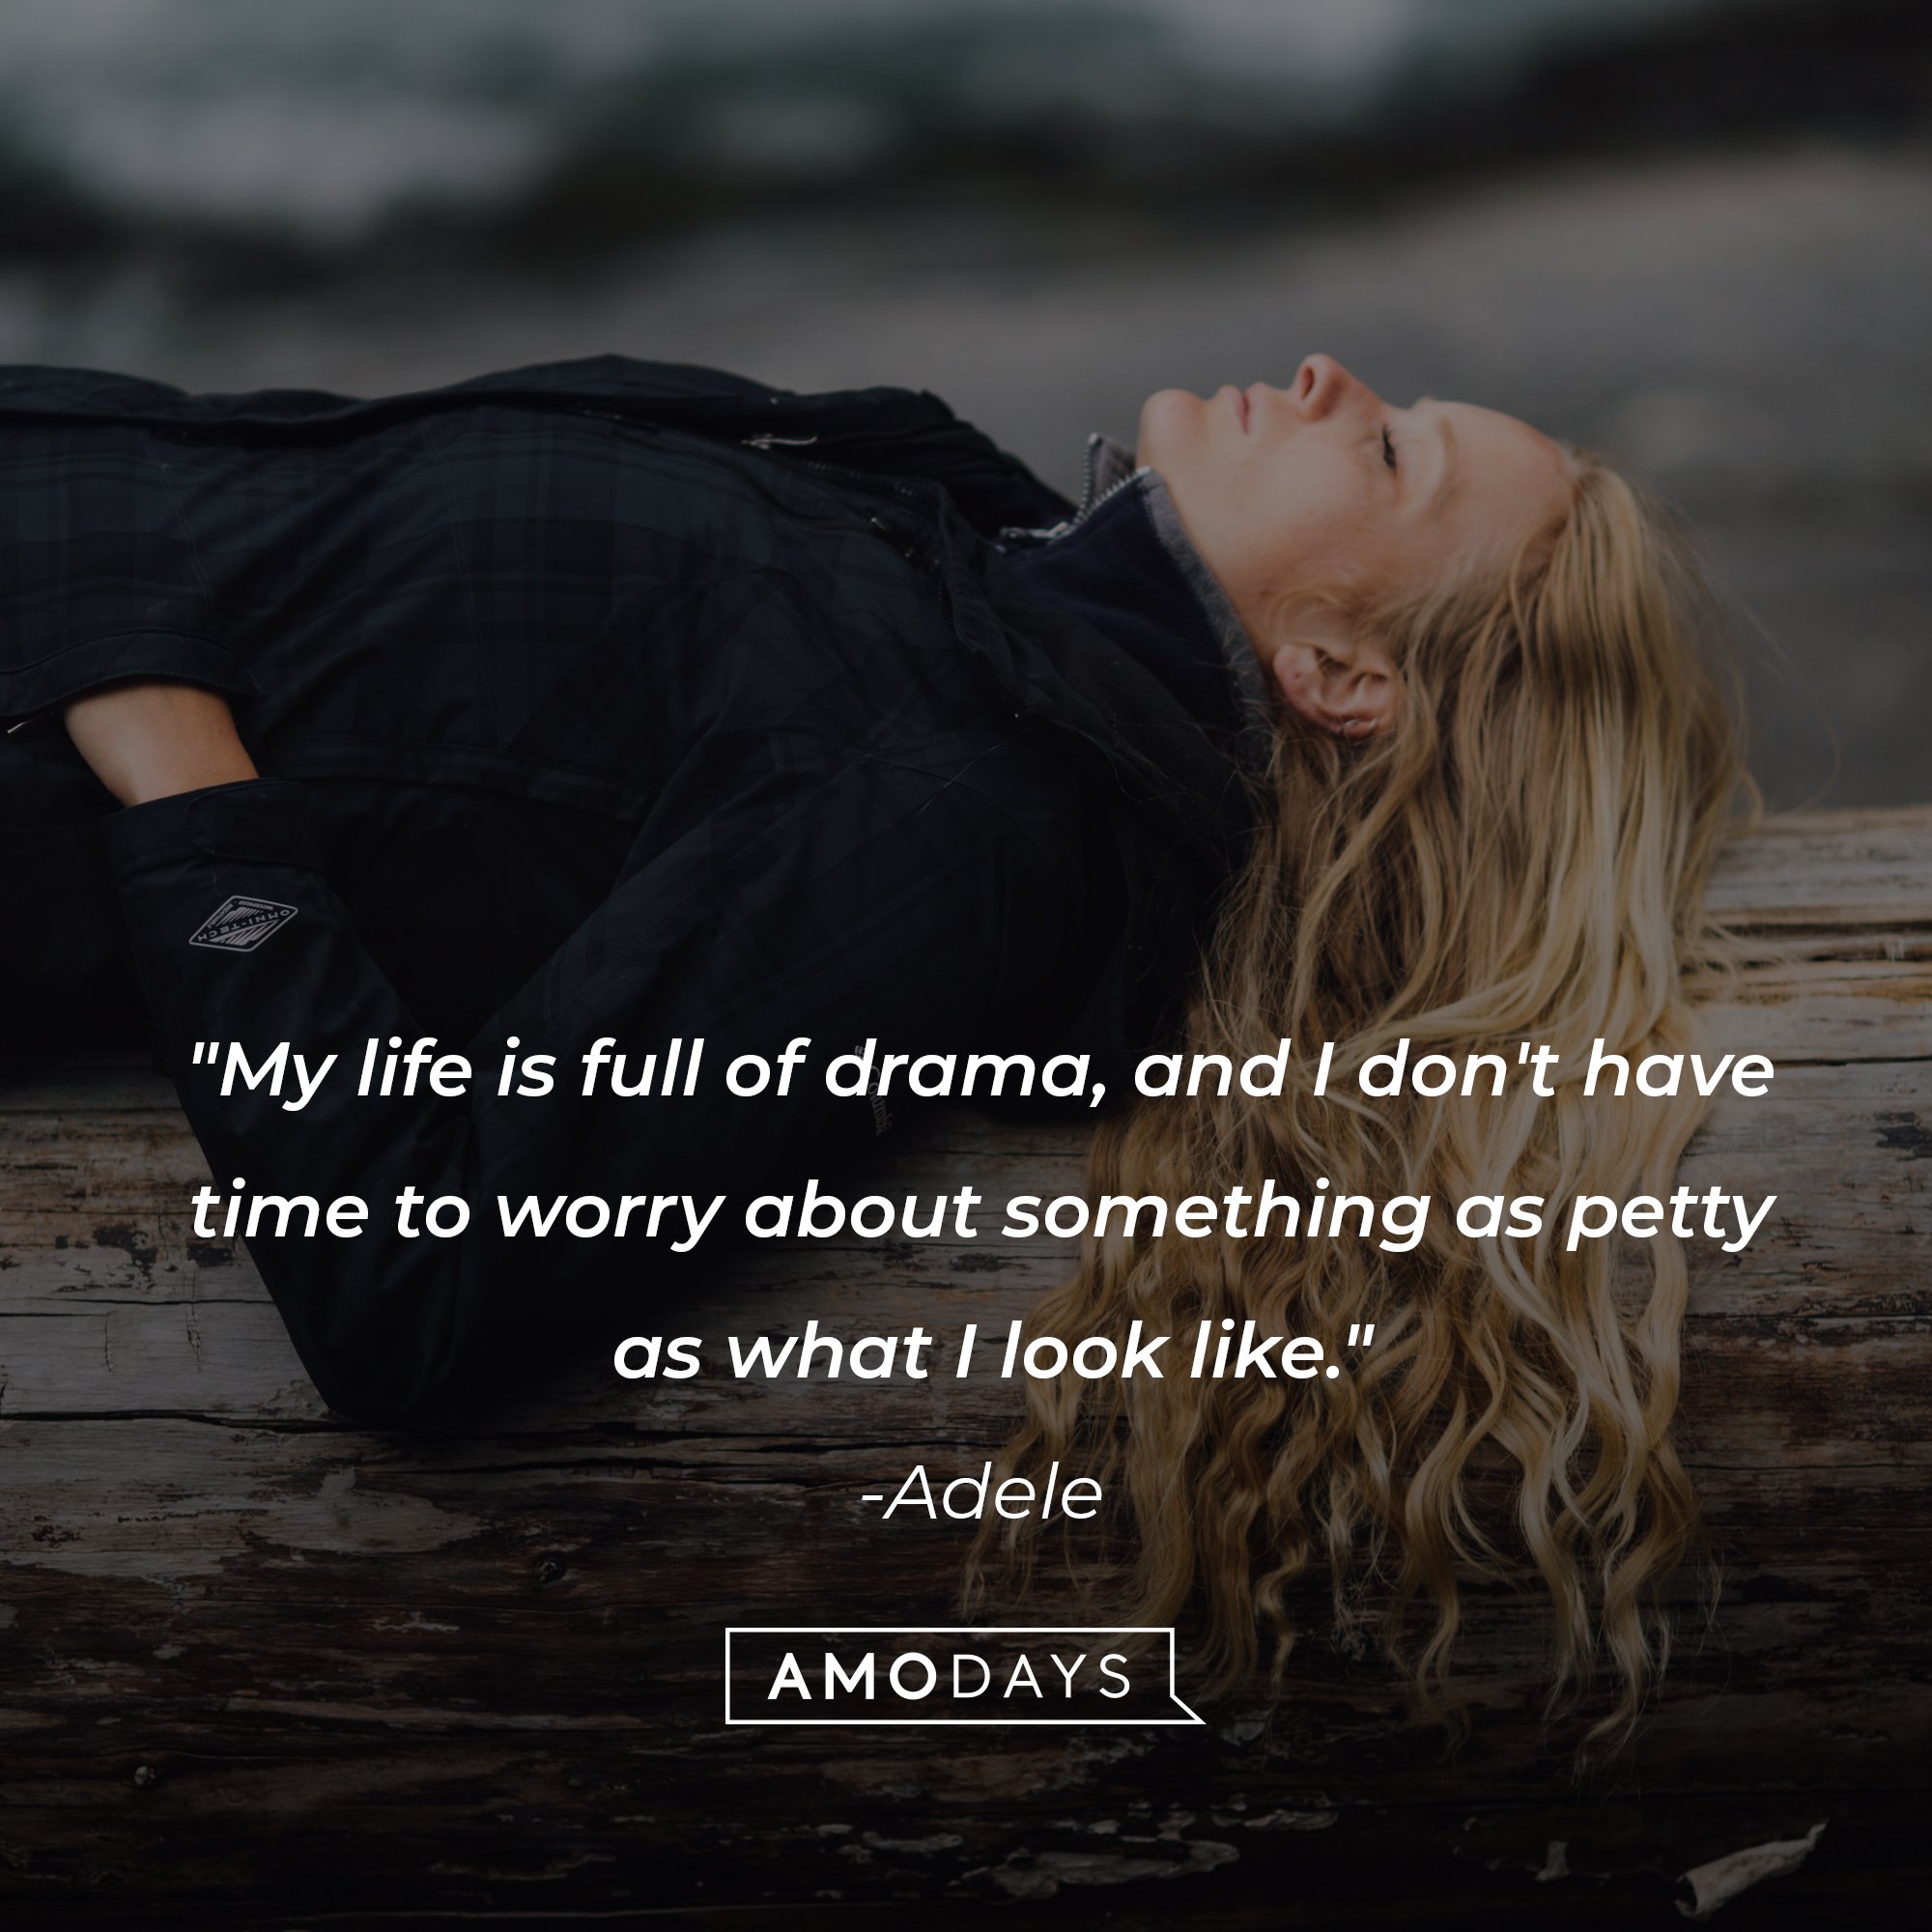 Adele’s quote: "My life is full of drama, and I don't have time to worry about something as petty as what I look like." | Image: AmoDays 